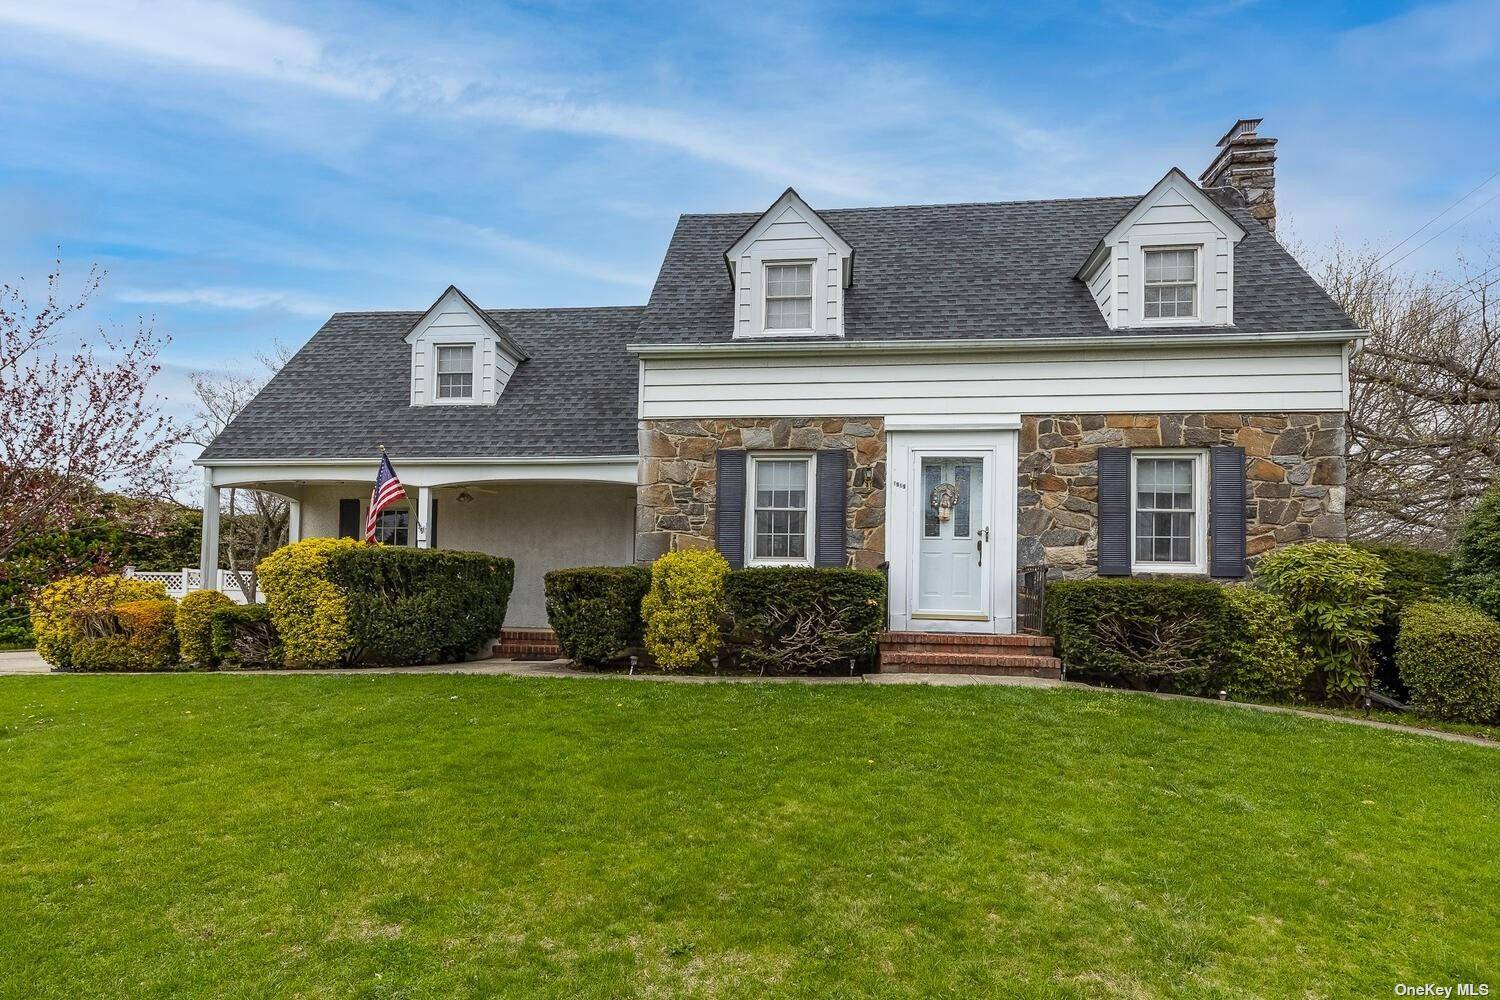 This classic fieldstone colonial has been well maintained and features a Living room with a beautiful stone fireplace, decorative ceiling, and classic moldings, a Formal Dining room with ceiling fan ...